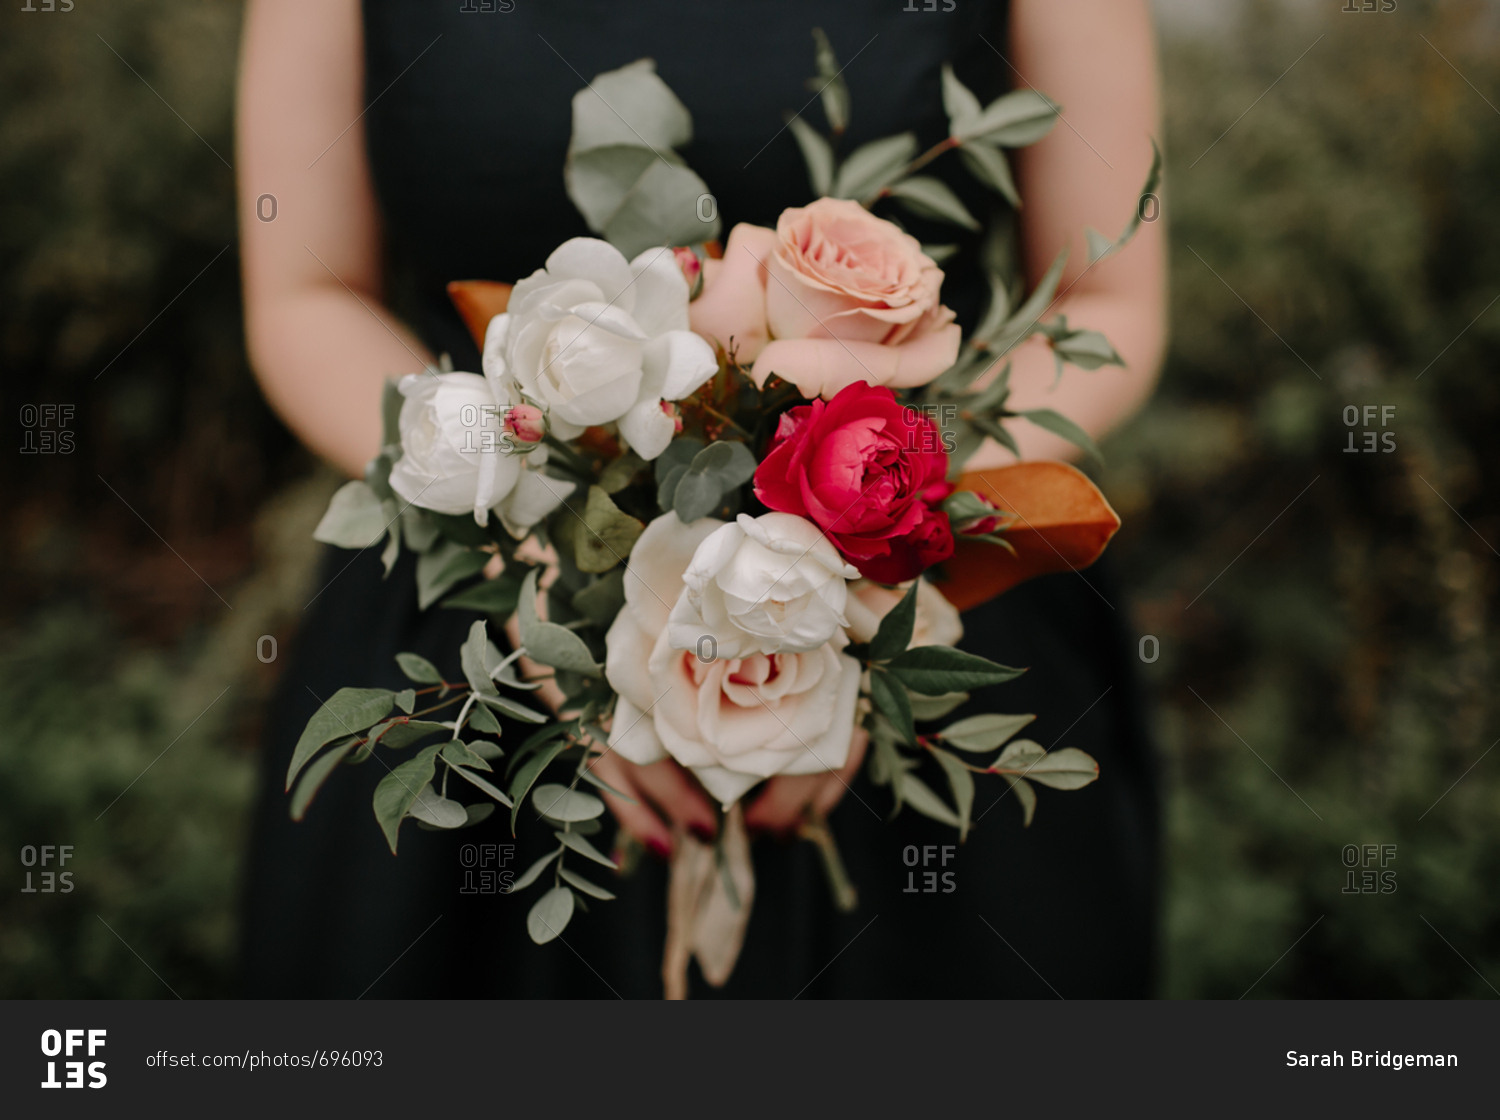 Bridesmaid holding bridal bouquet with red, white, and pink roses